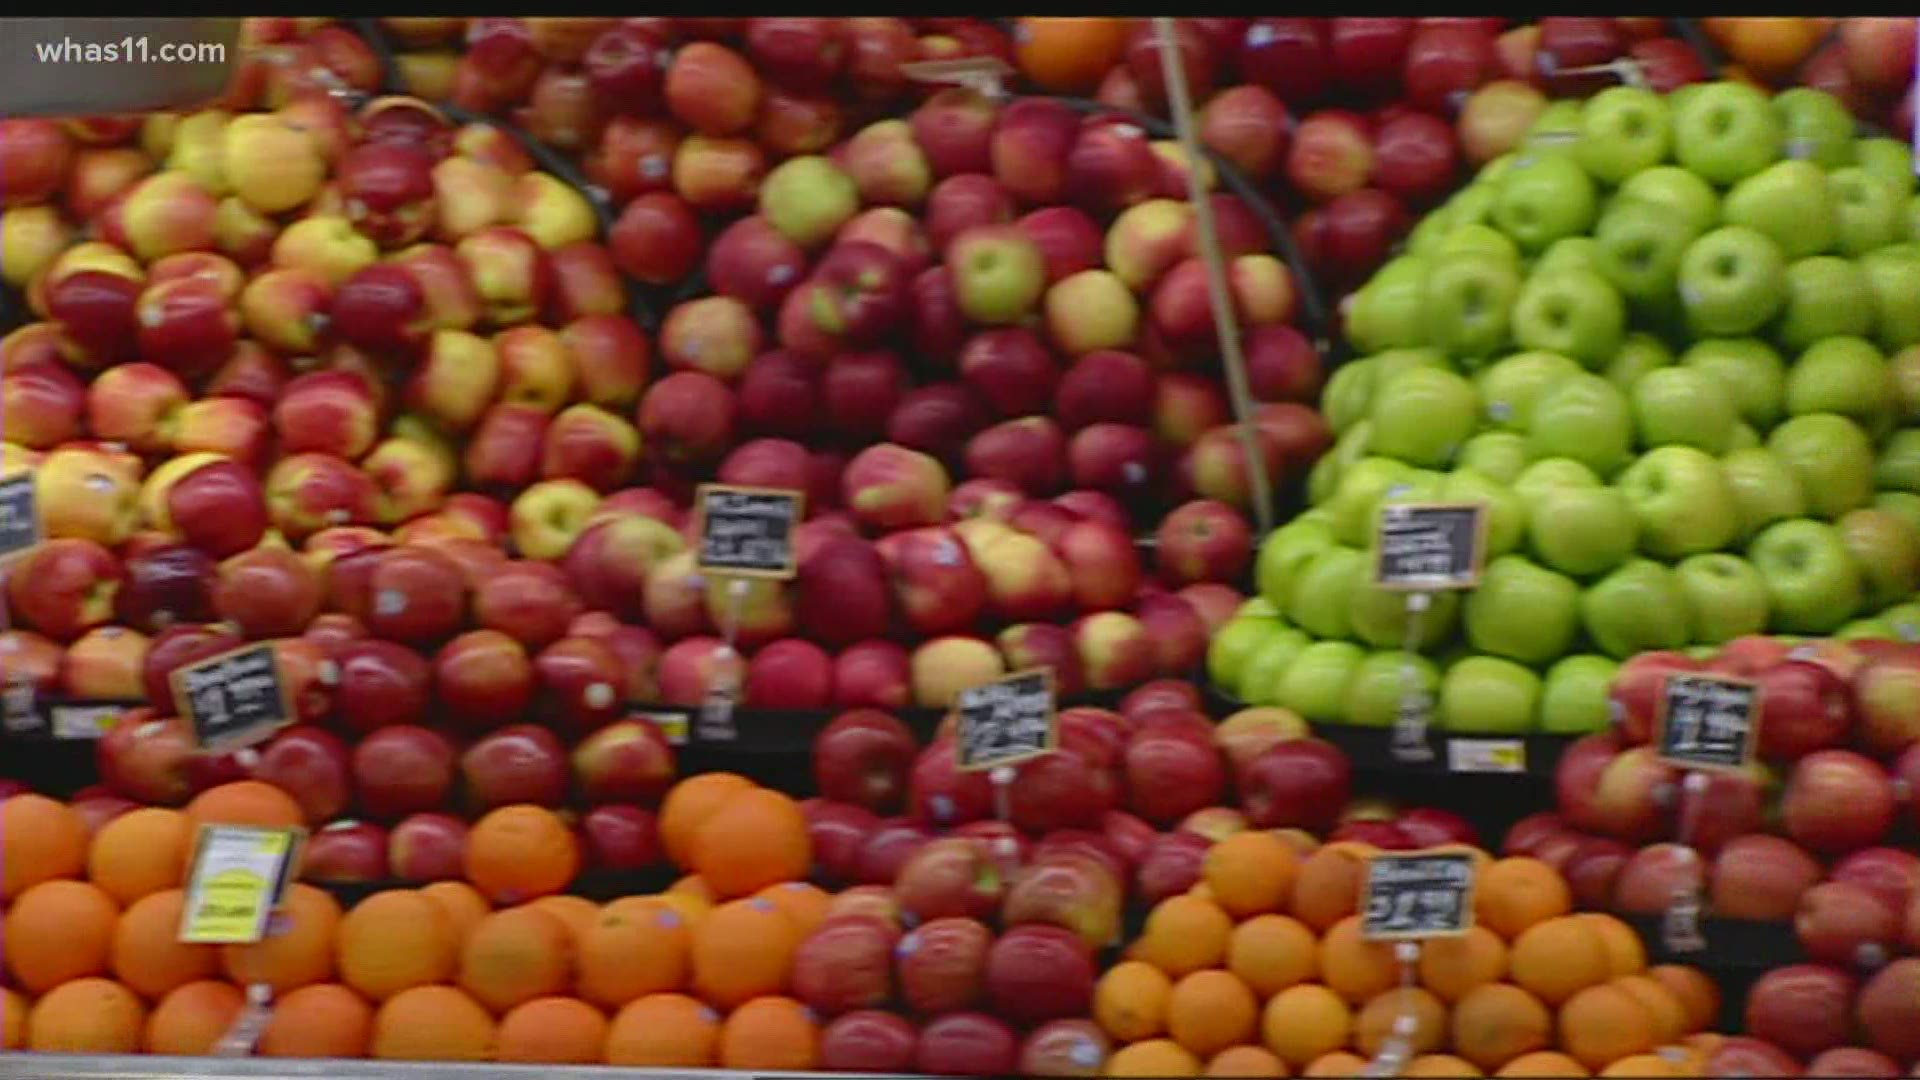 A group is hoping to fix that by launching cooperative grocery stores throughout the community.